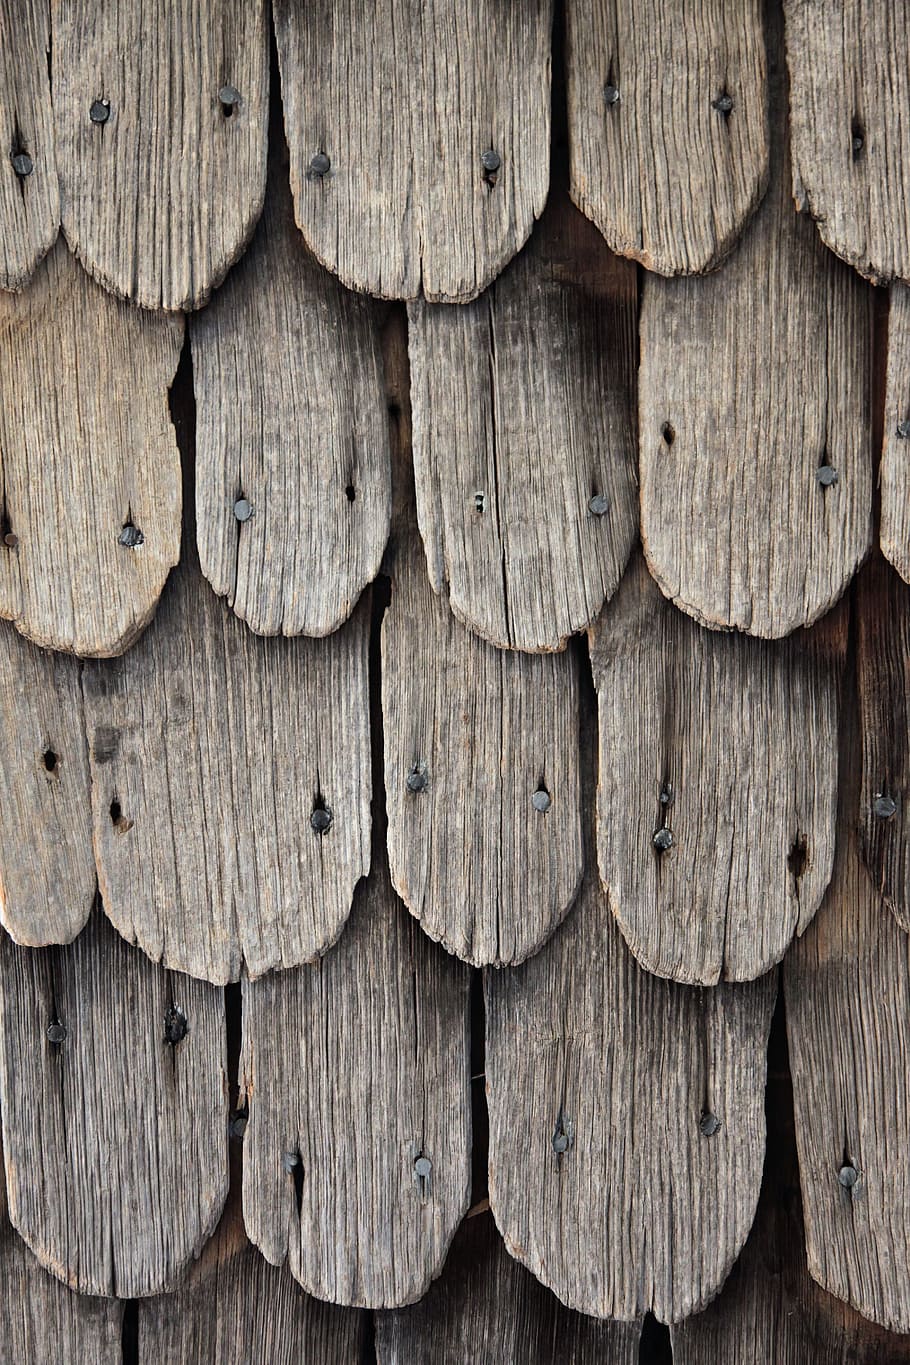 wood shingles, old, structure, colors of nature, roof, grain